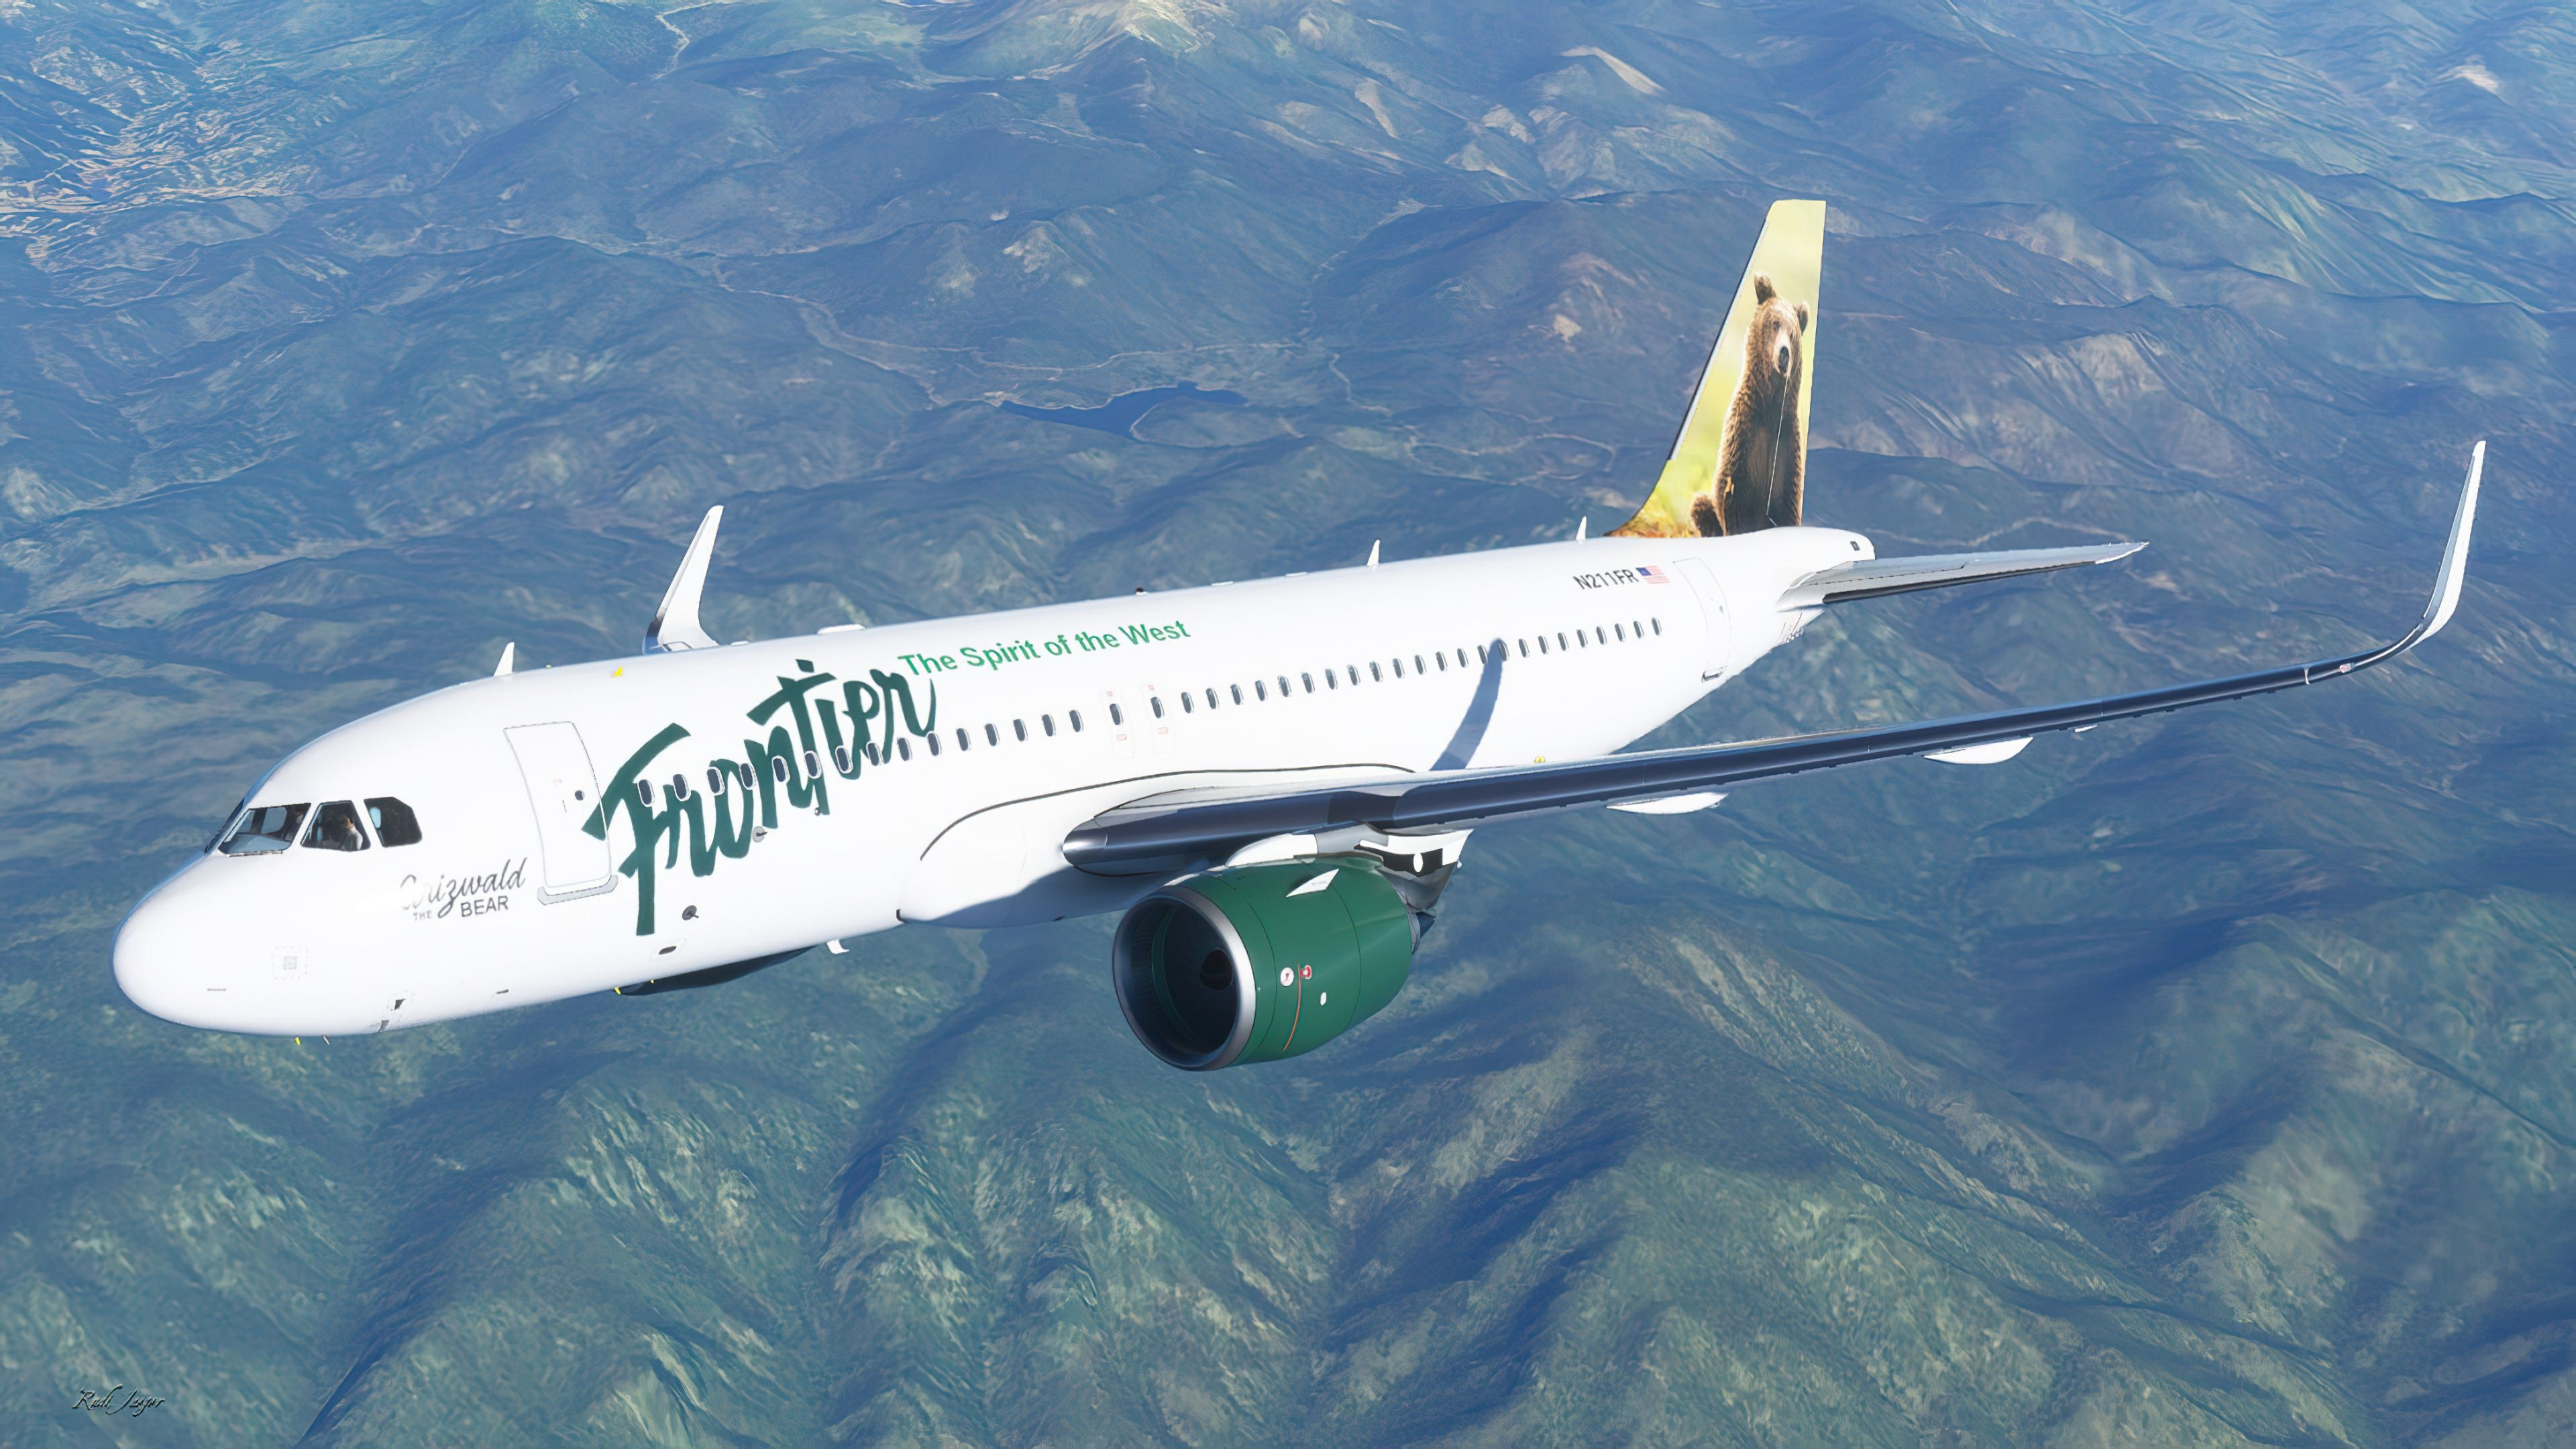 A320neo images, Frontier Airlines, A320neo, Free, 3840x2160 4K Desktop